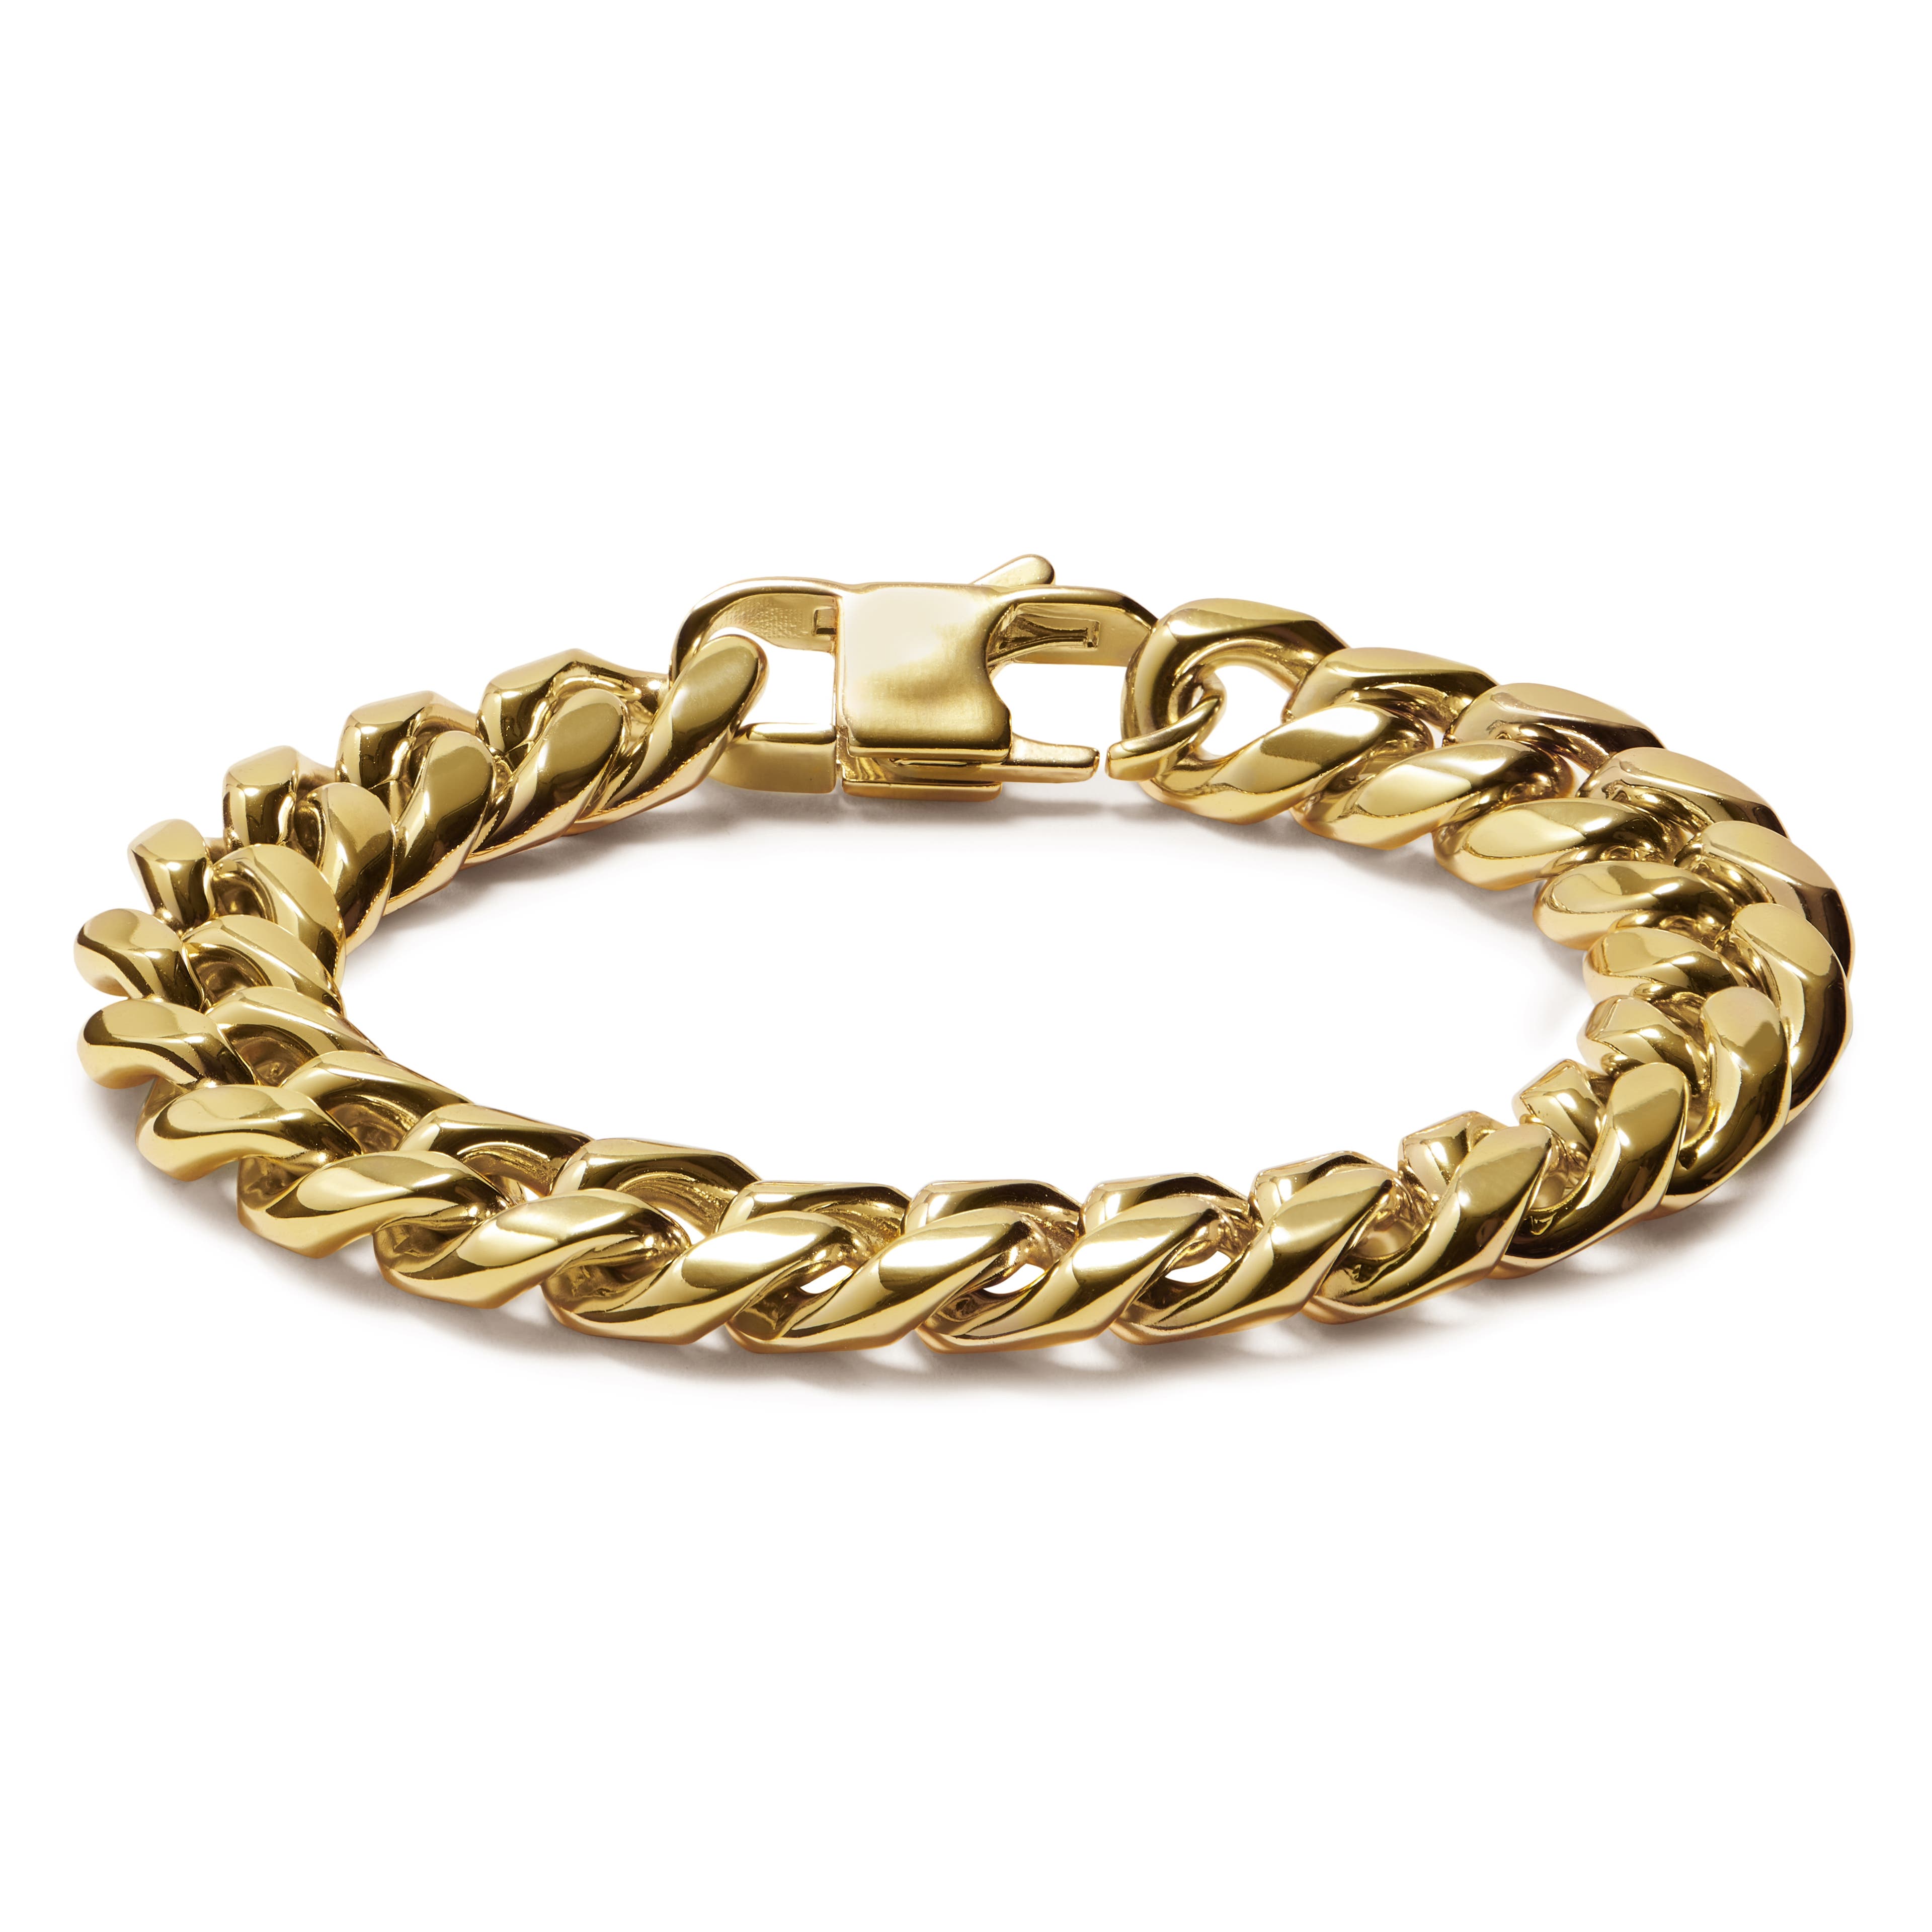 12mm Gold-Tone Stainless Steel Curb Chain Bracelet